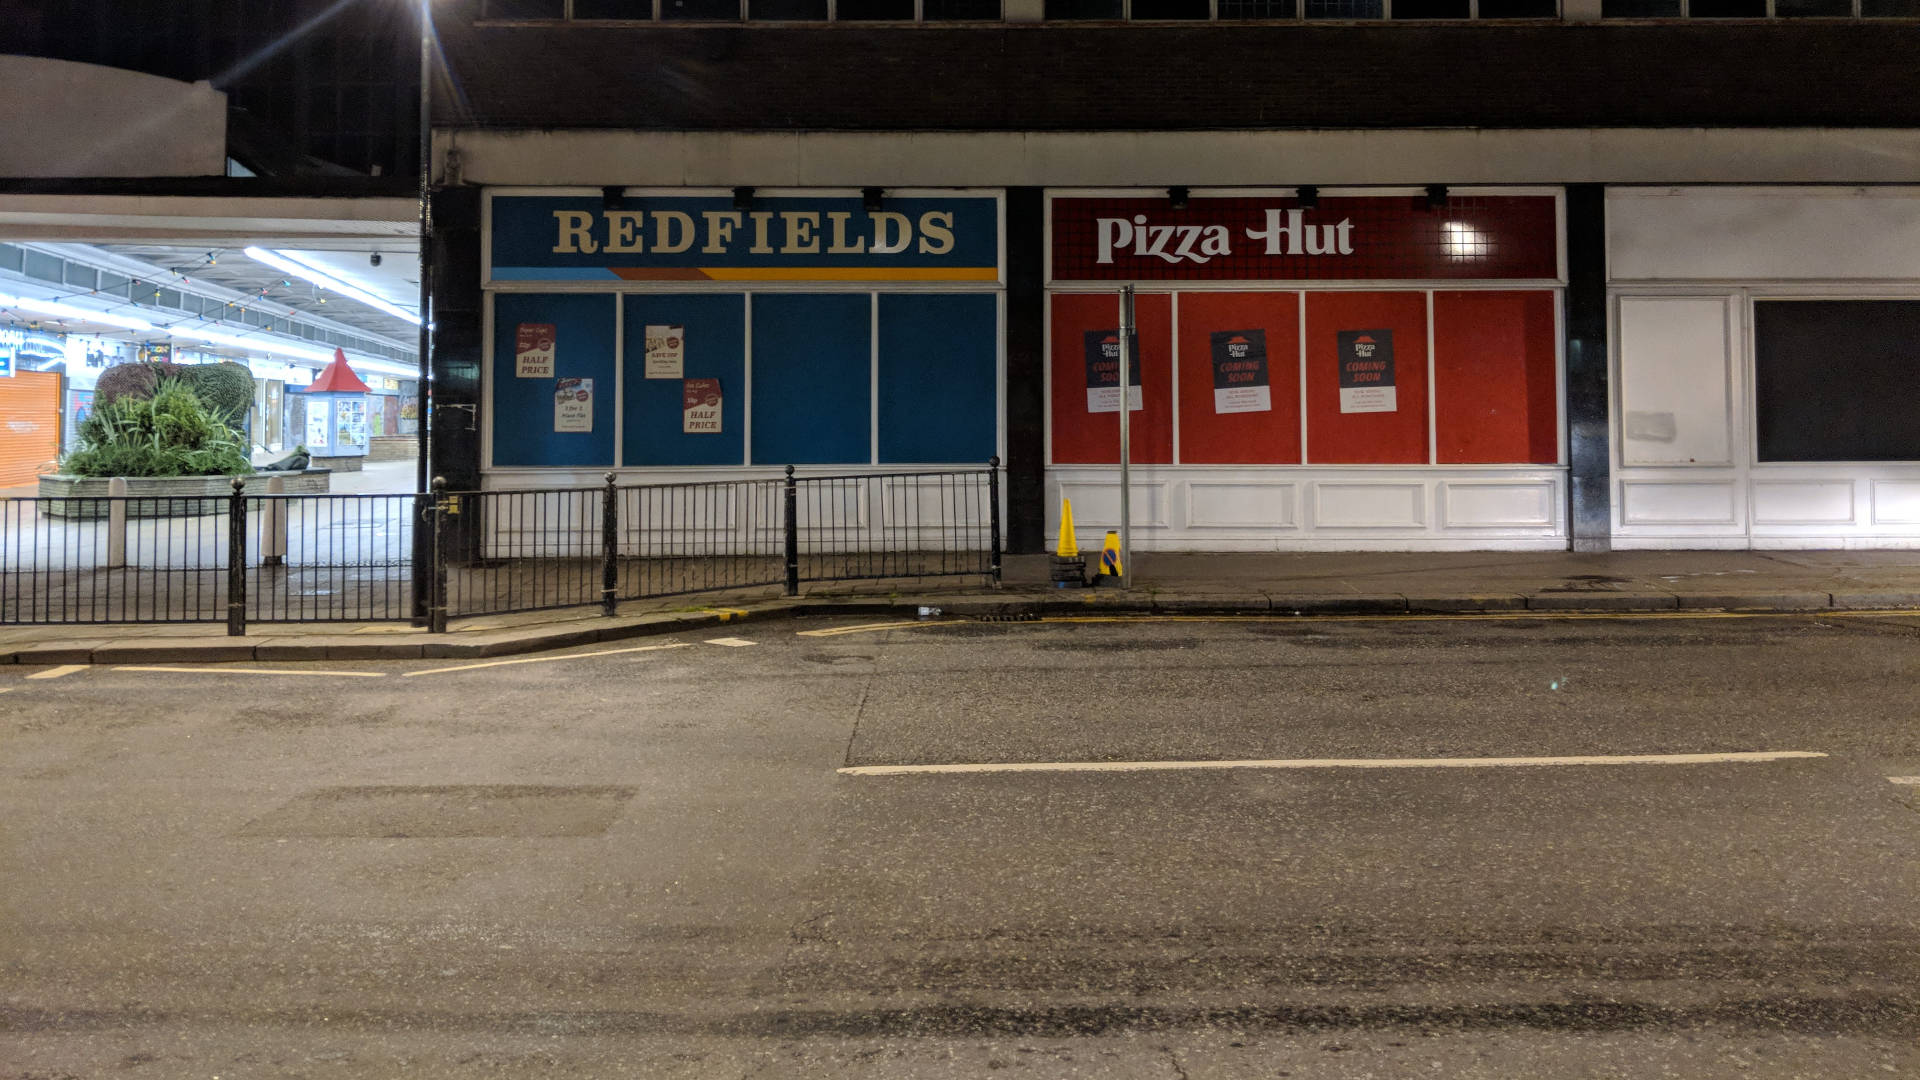 Pizza Hut And Redfields Stores